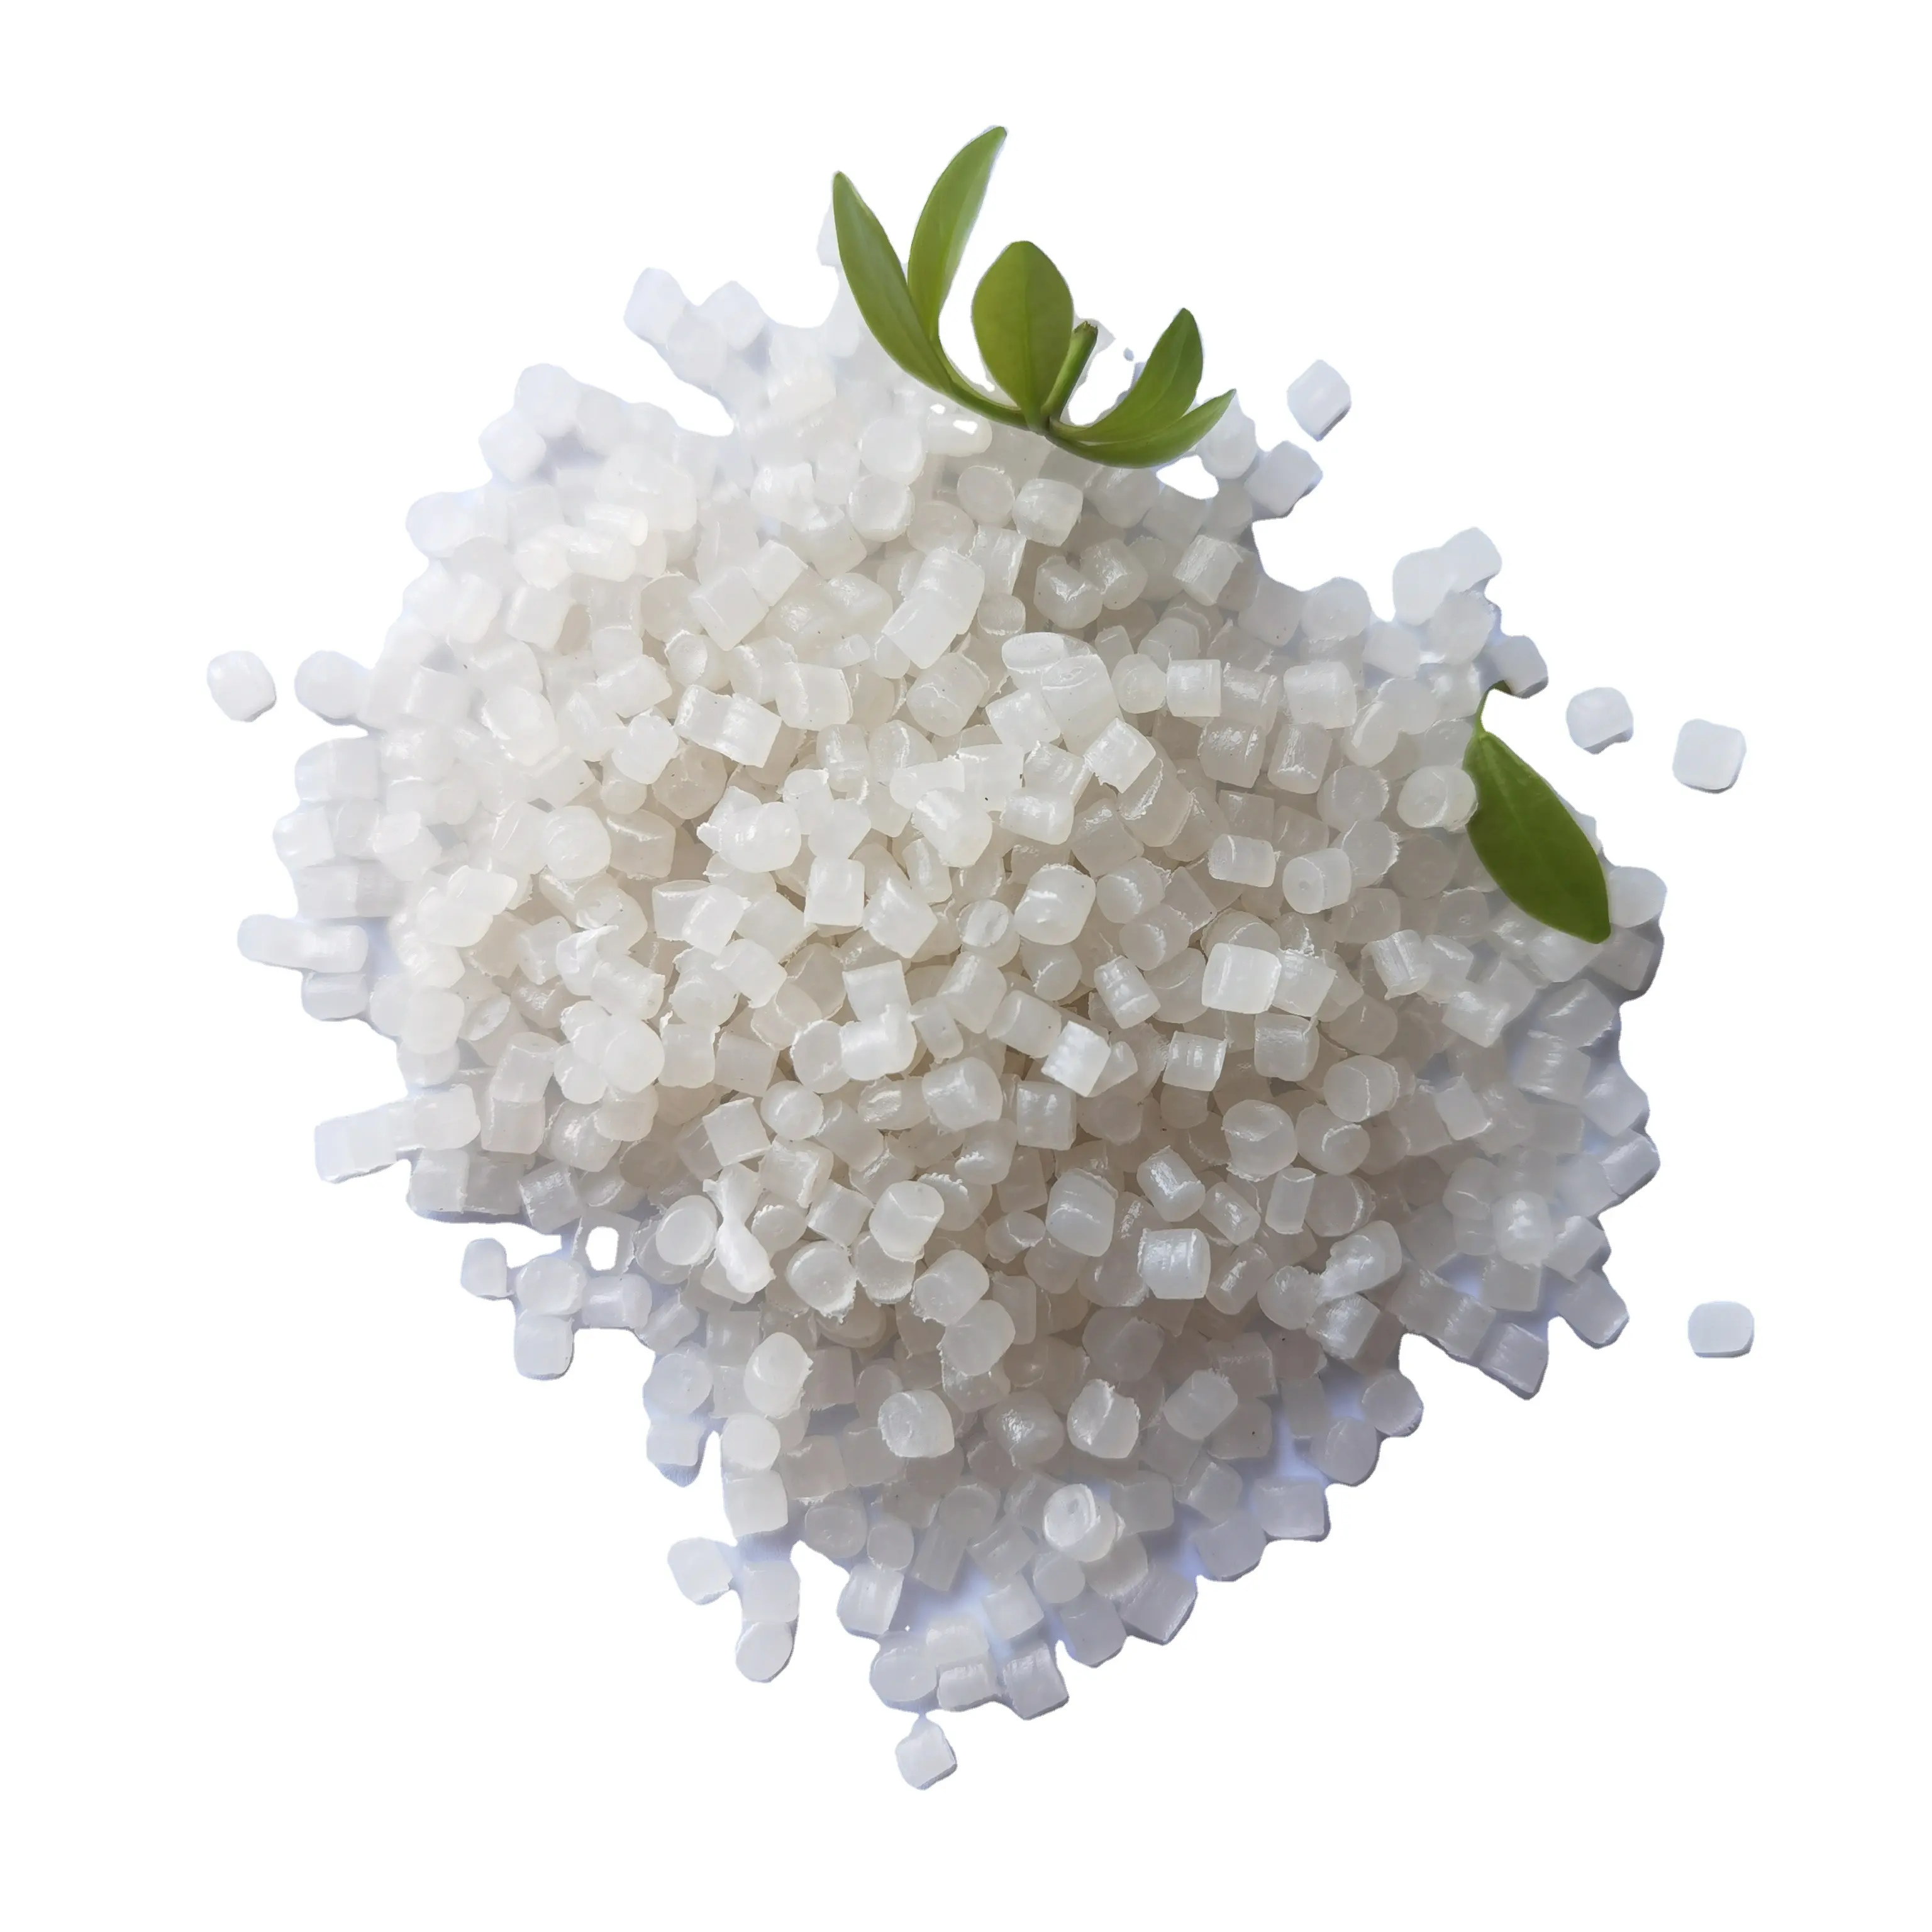 Sinopec raw and Recycle LDPE HDPE MDPE LLDPE Granules Plastic Raw Material Transparent